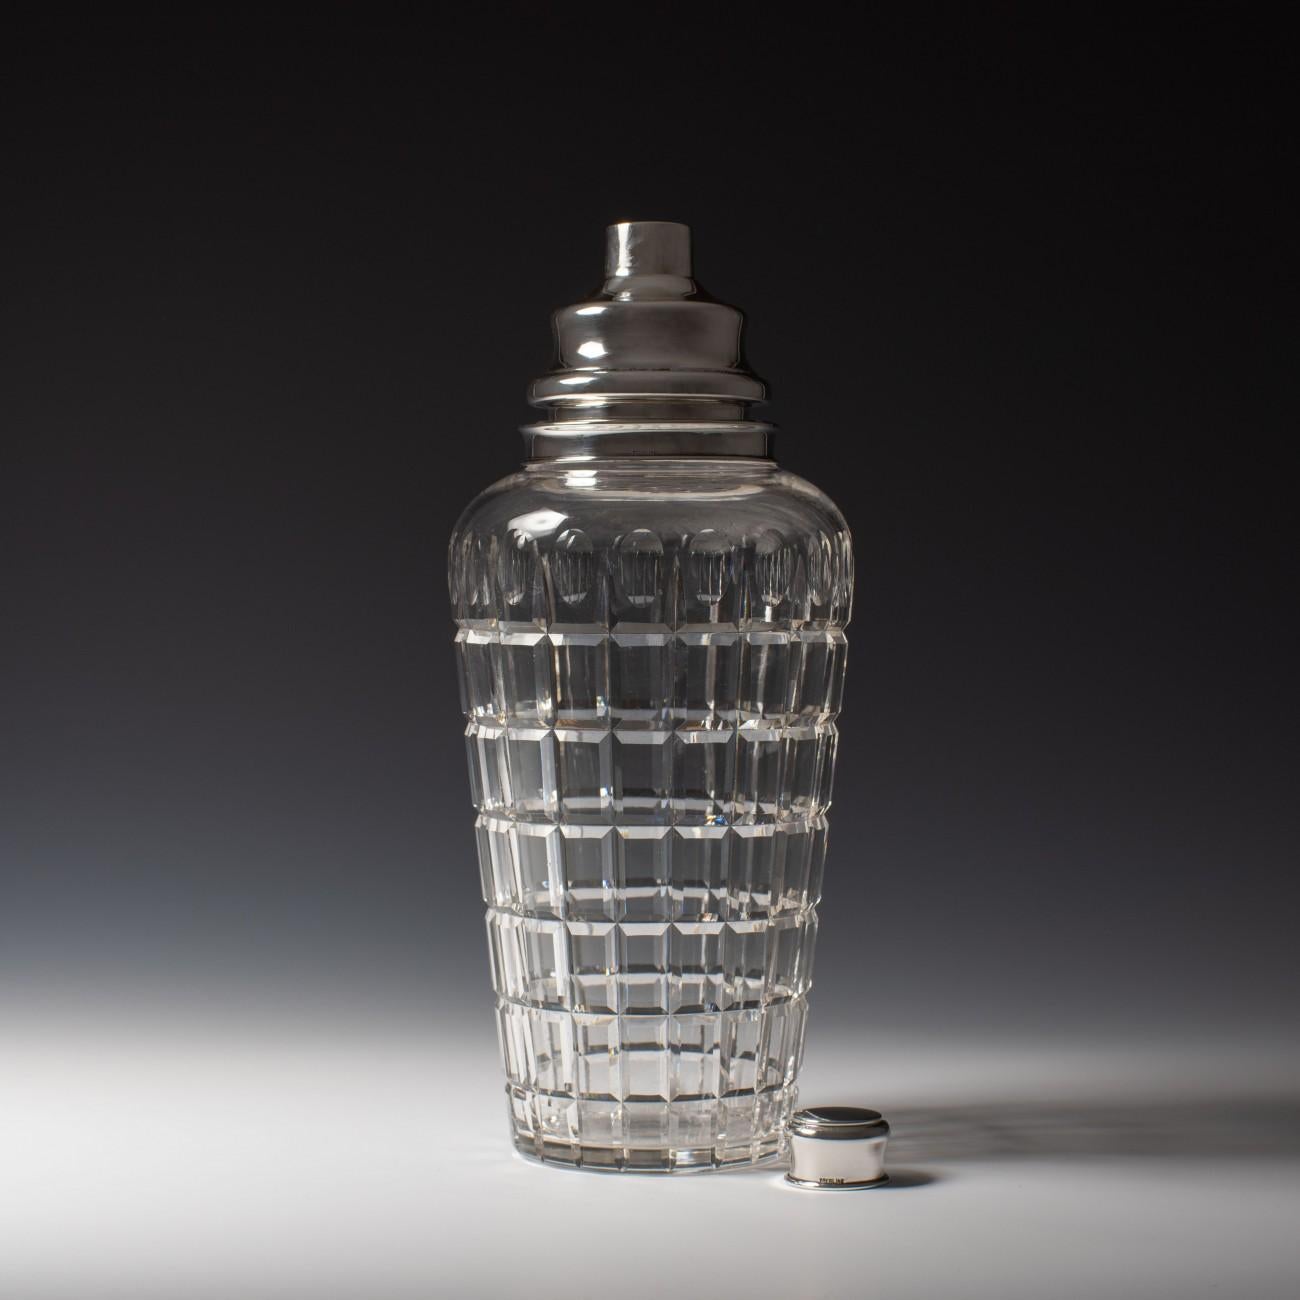 A large stylish Art Deco cut glass cocktail shaker by Cartier with silver top stamped Cartier, Sterling, circa 1940.

Dimensions: 30.5 cm/12 inches (height) x 13 cm/5? inches (max diameter)

Bentleys are Members of LAPADA, the London and Provincial